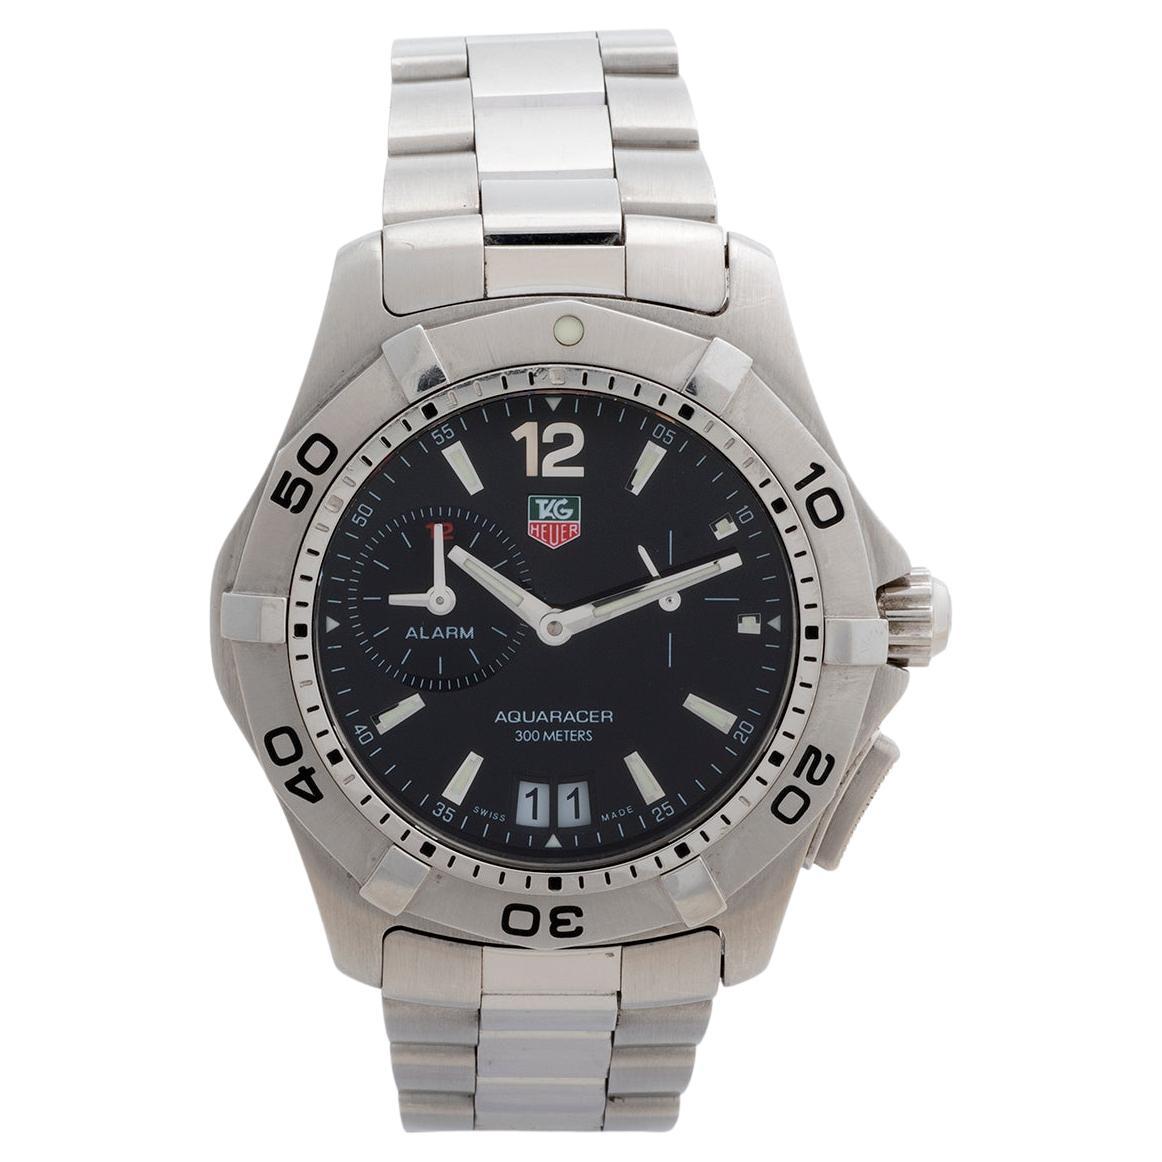 Our Tag Heuer Aquaracer Alarm , reference WAF111Z , is presented in excellent condition with some light signs of use from new, and unpolished. This reference is powered by a quartz movement and has an alarm function. The 40mm steel case features a